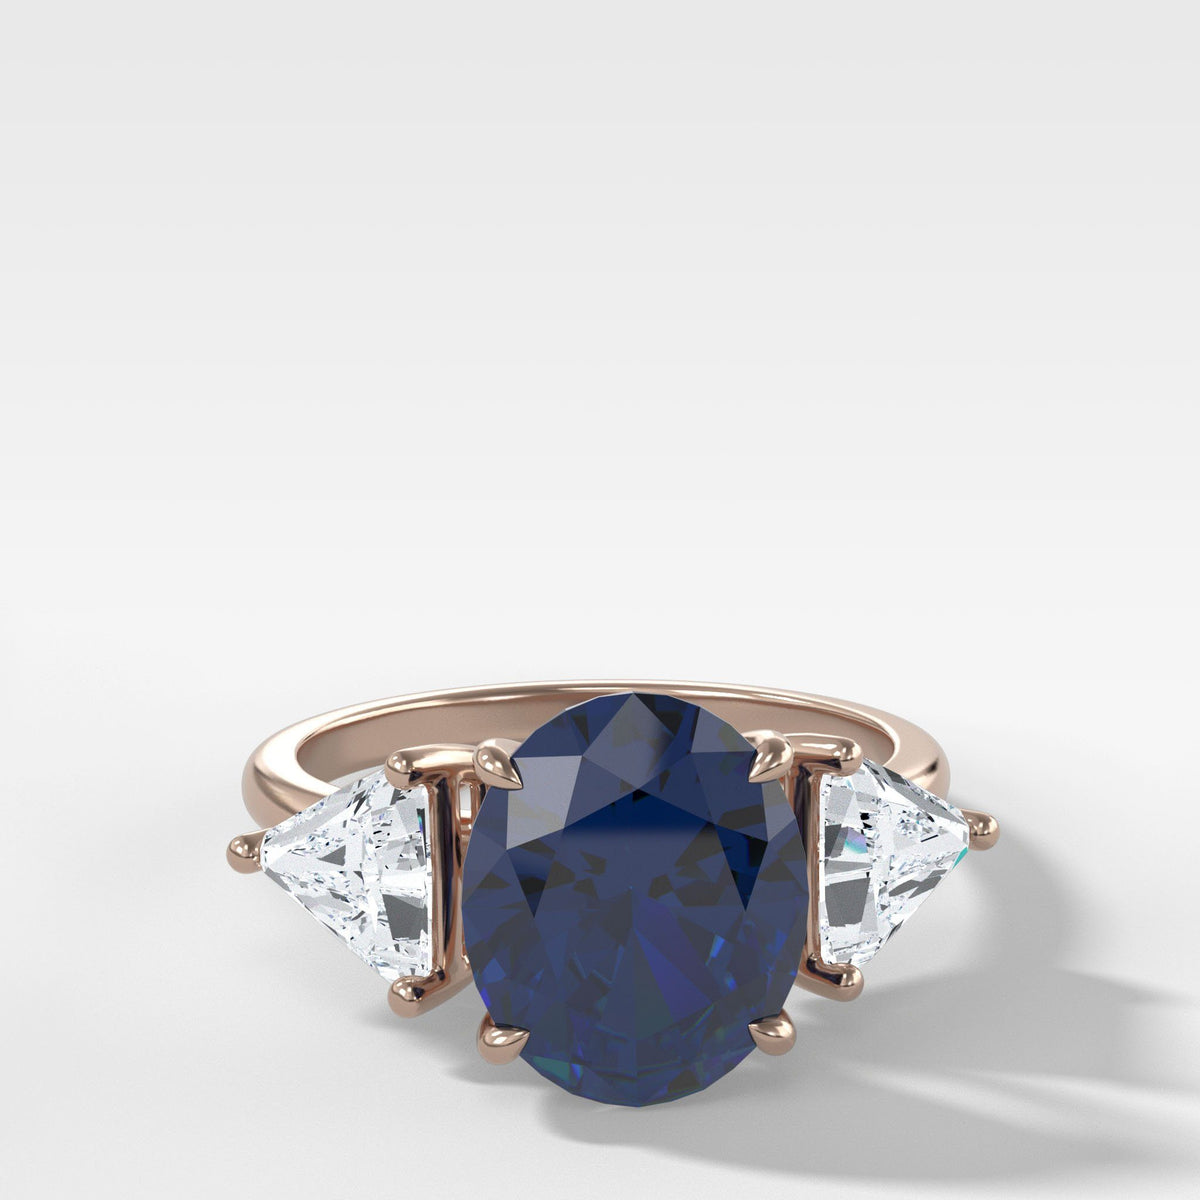 Oval Cut Sapphire Three Stone Engagement Ring With Trilliant Cut Diamond Sides by Good Stone in Rose Gold